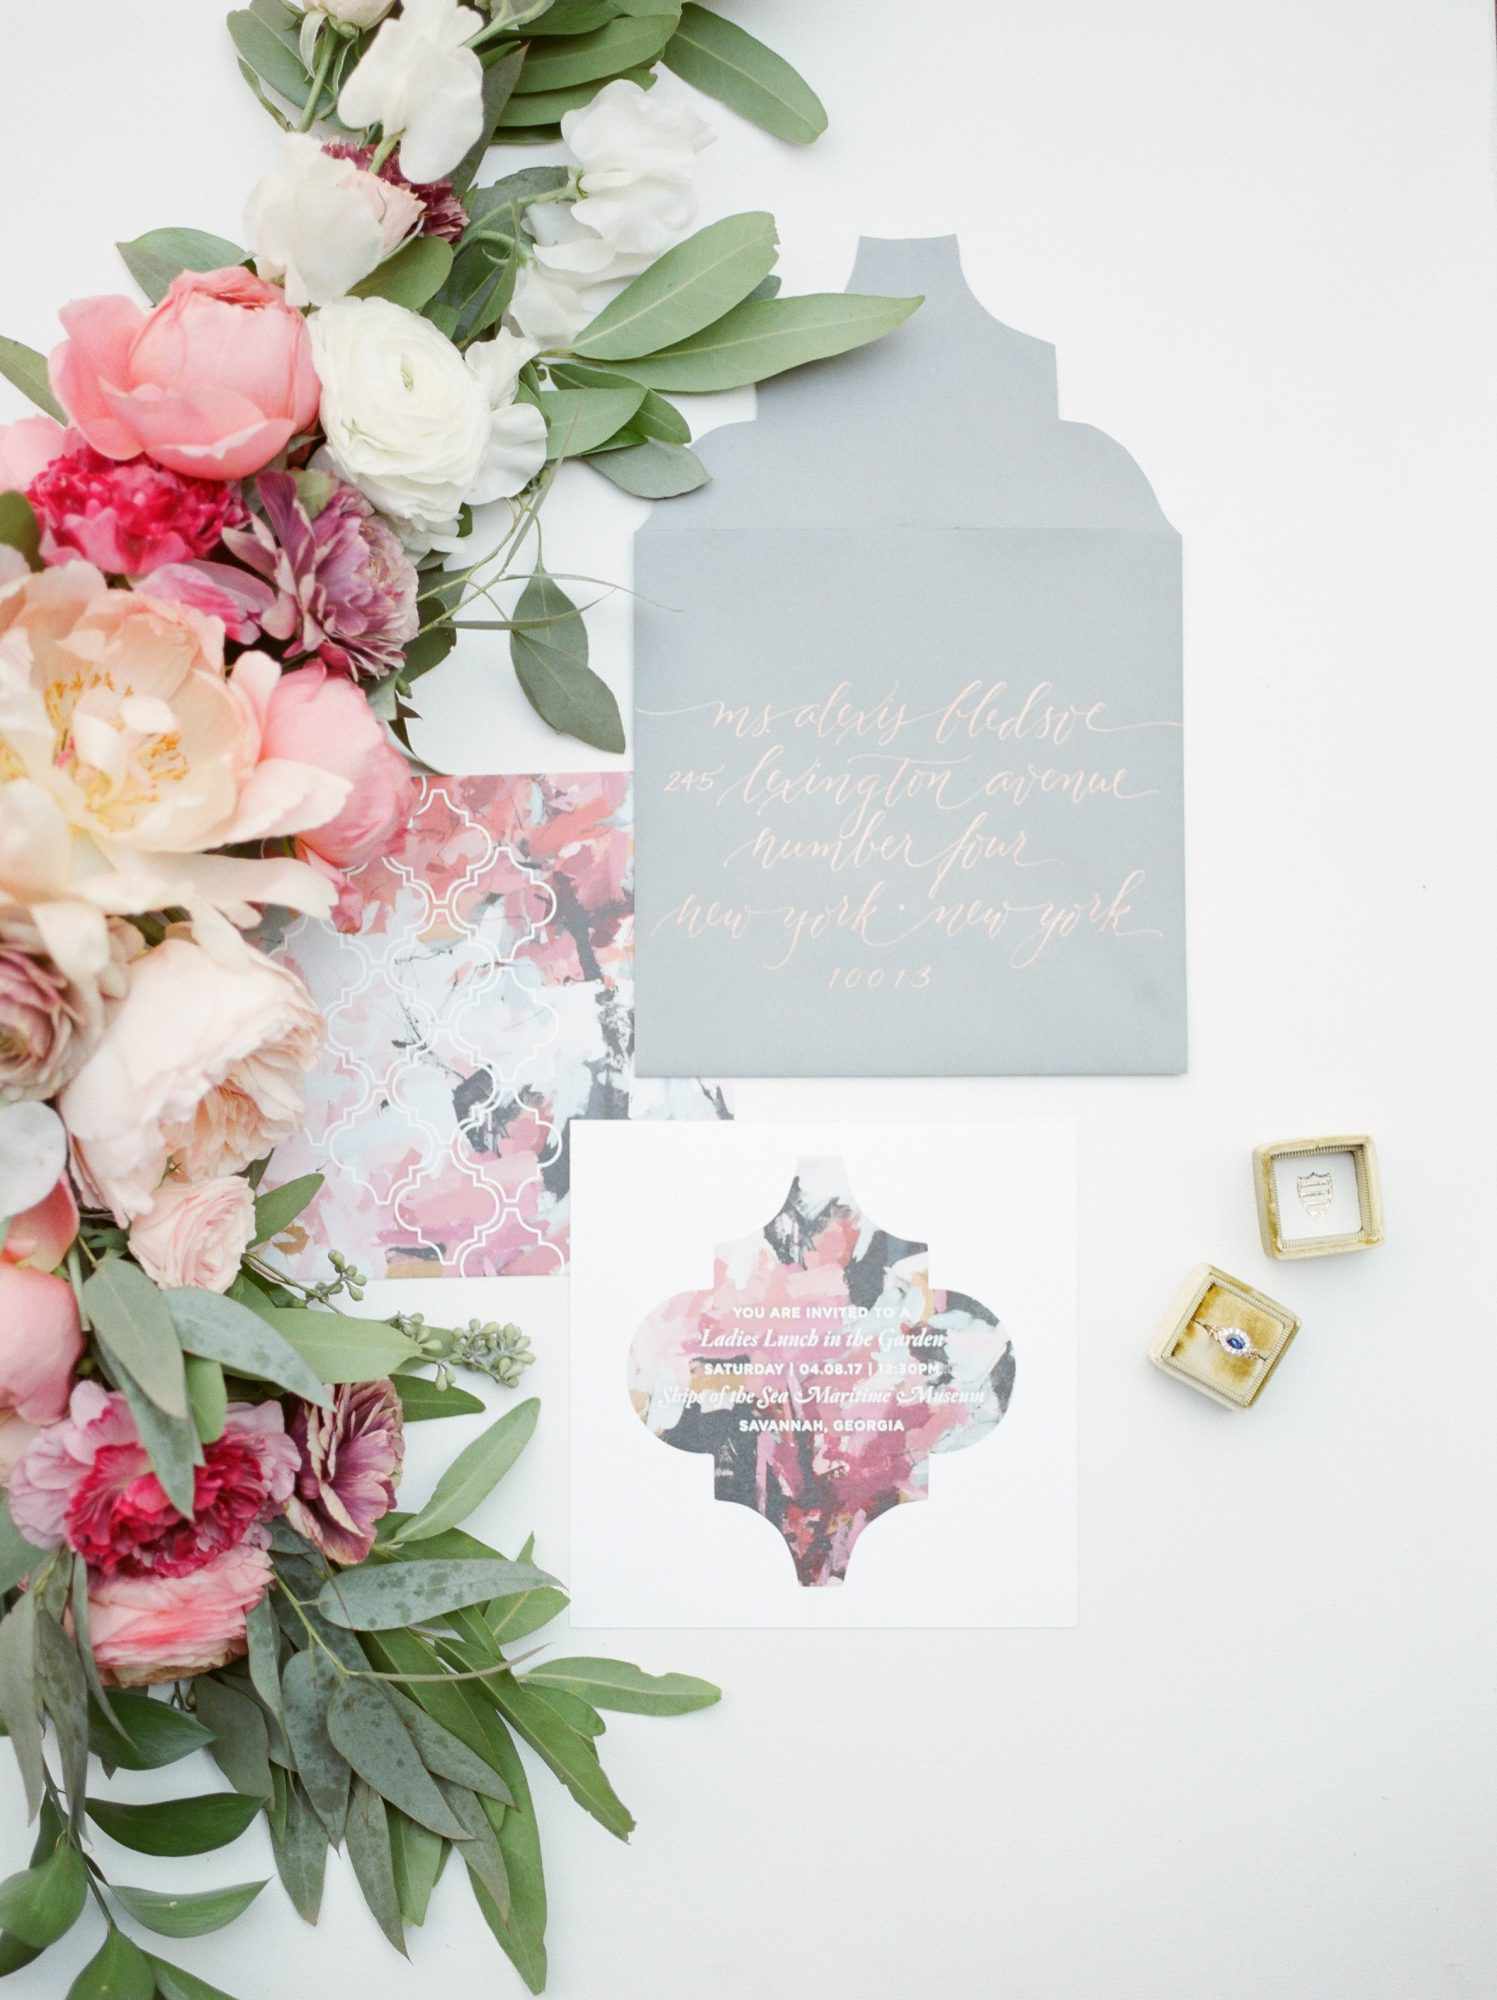 Gray and pink floral invitation suite with bright pink floral garland